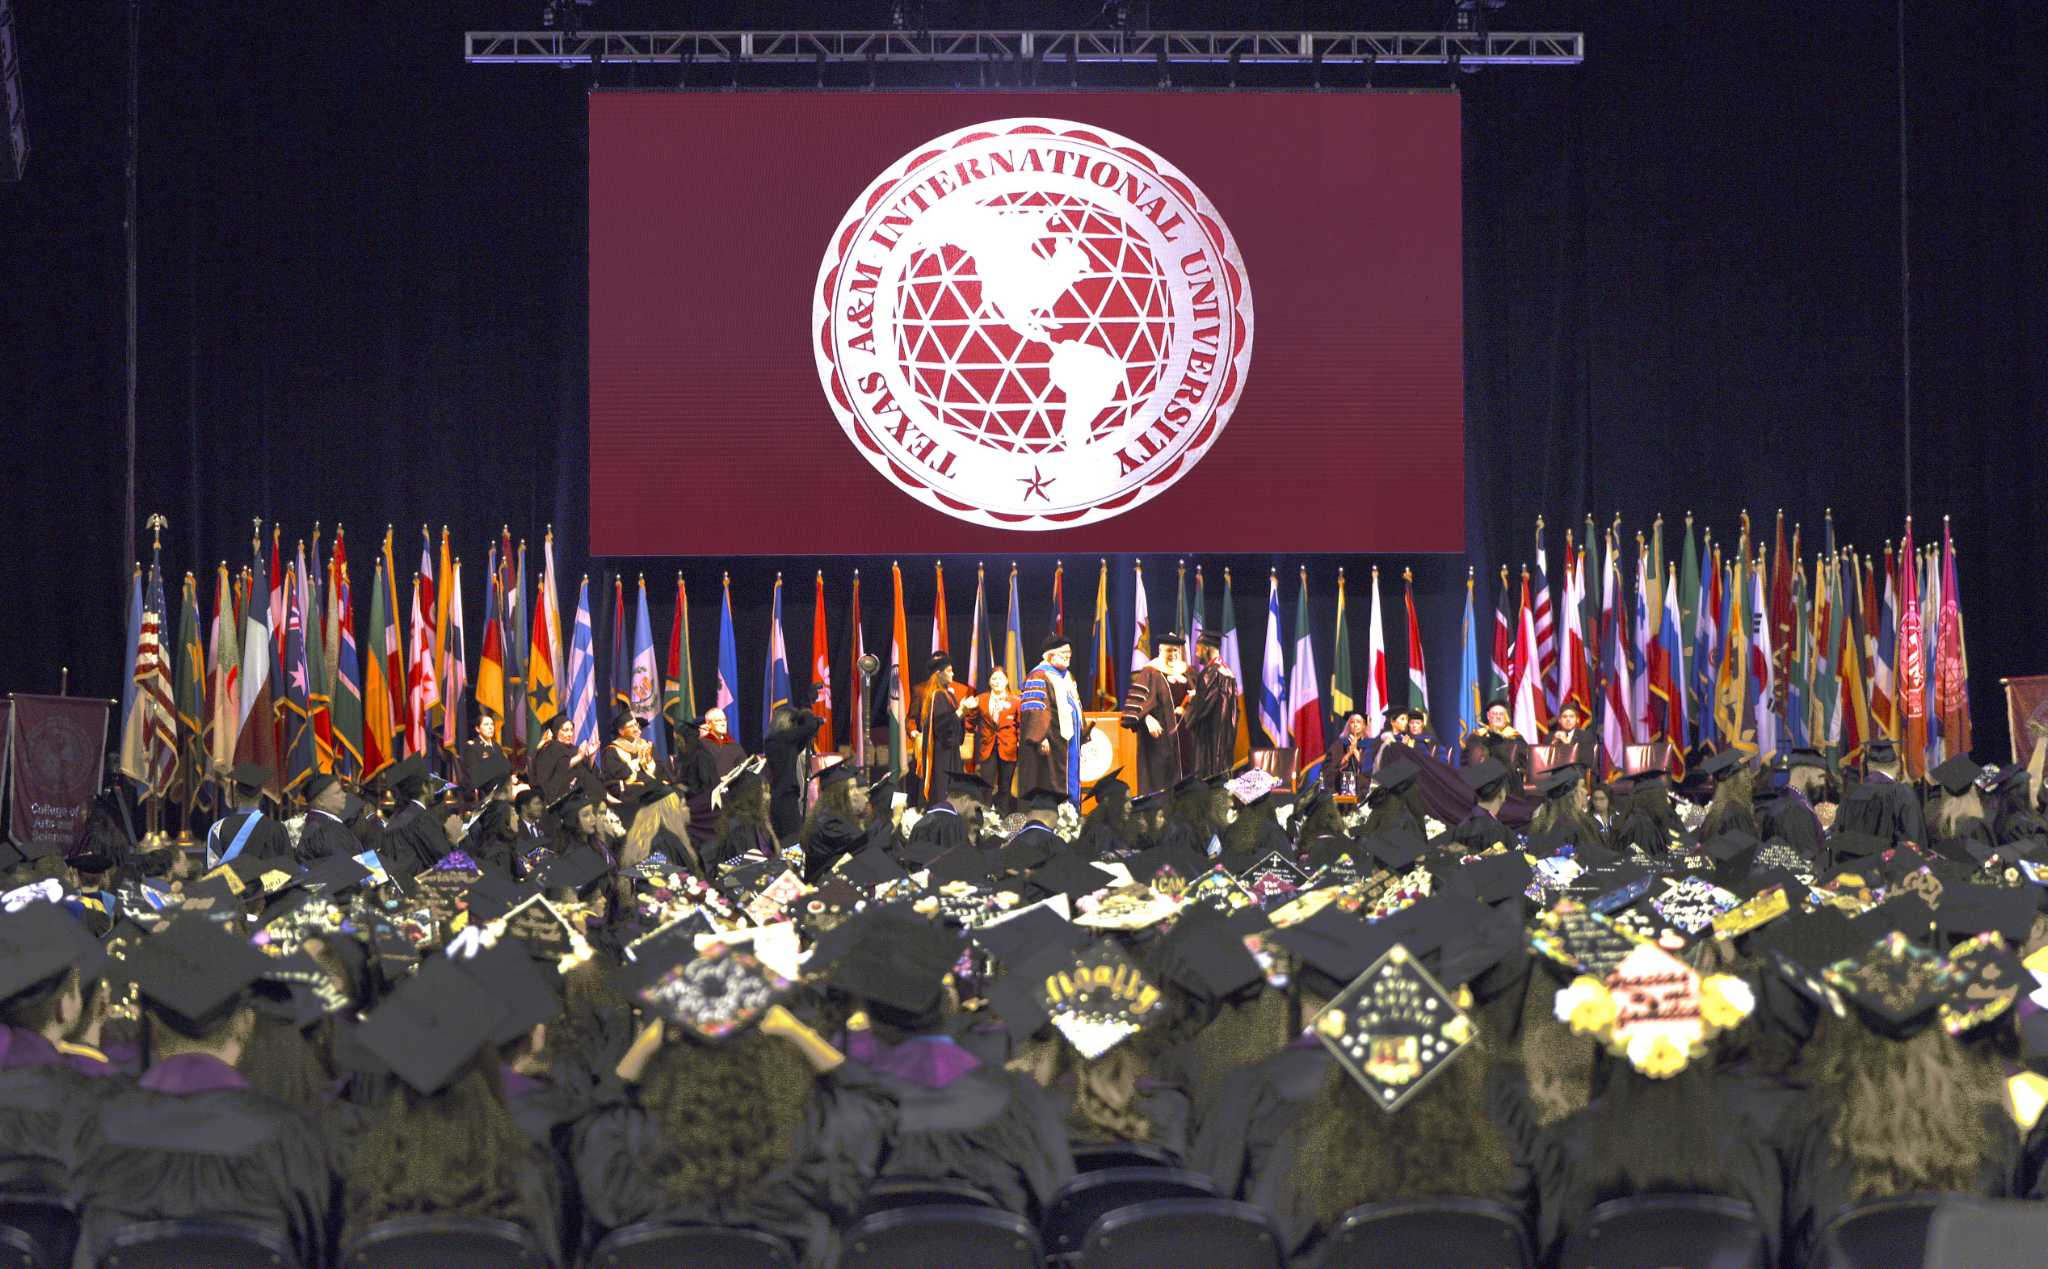 TAMIU to hold historic Fall 2020 Virtual Commencement Ceremony on